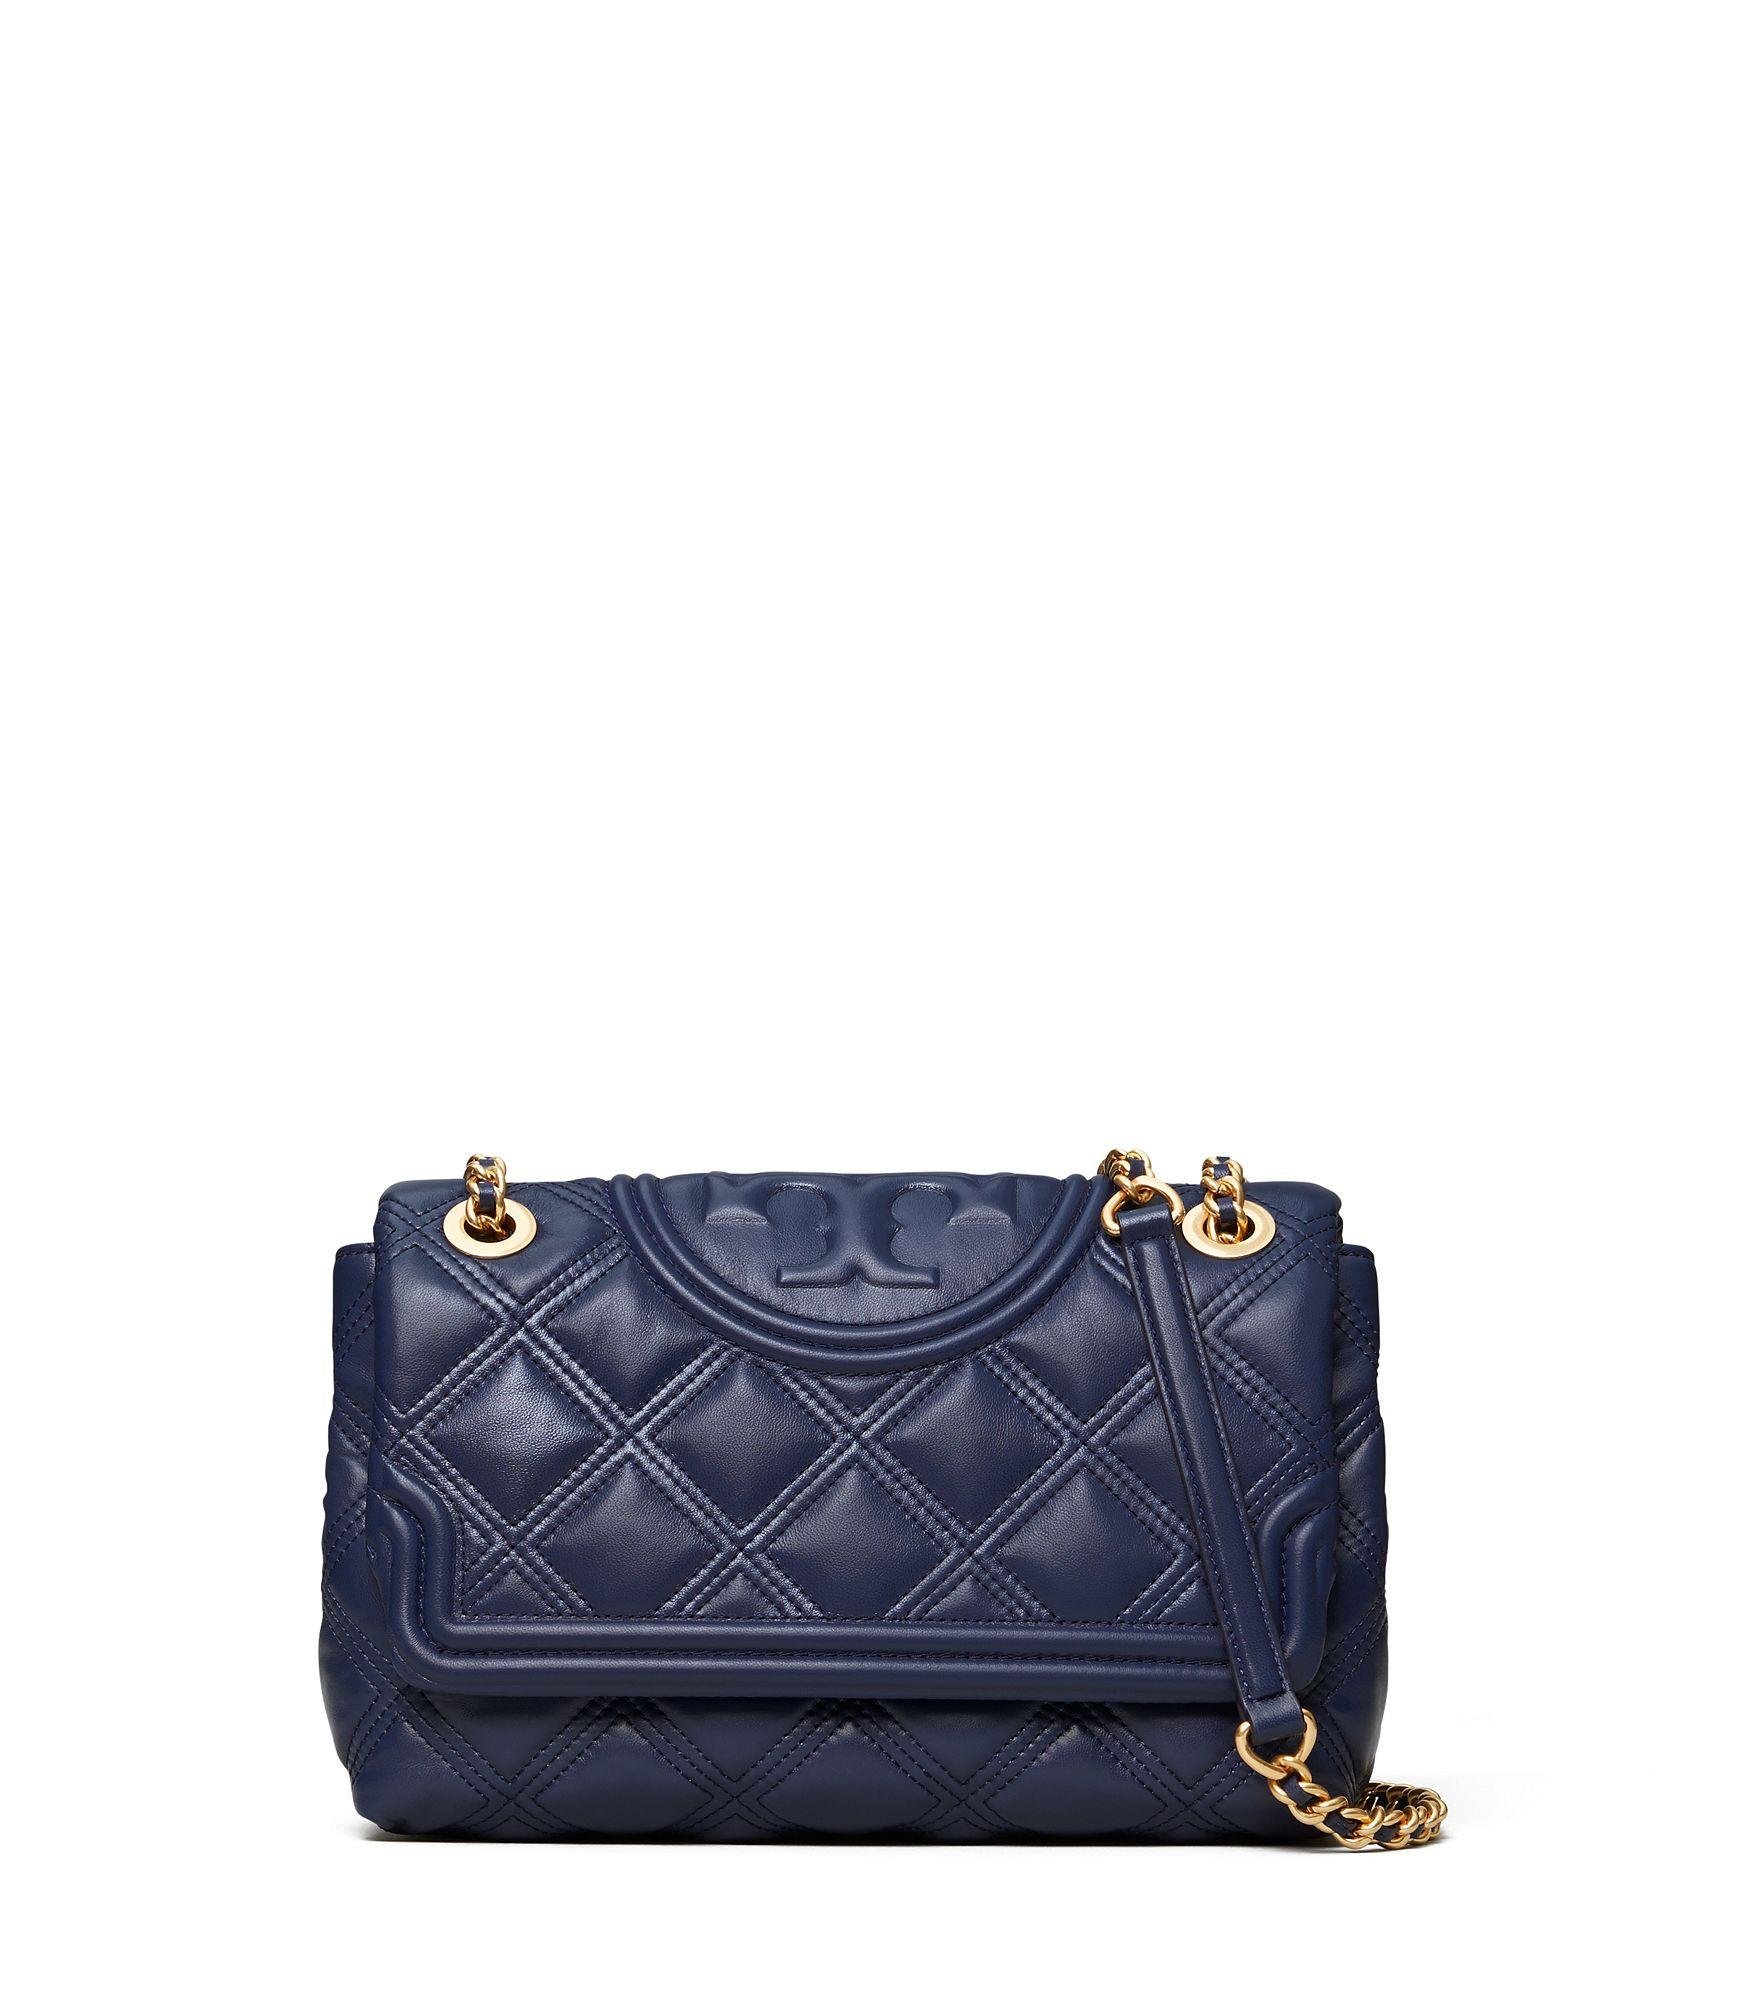 Tory Burch Fleming Soft Convertible Leather Shoulder Bag in Blue | Lyst